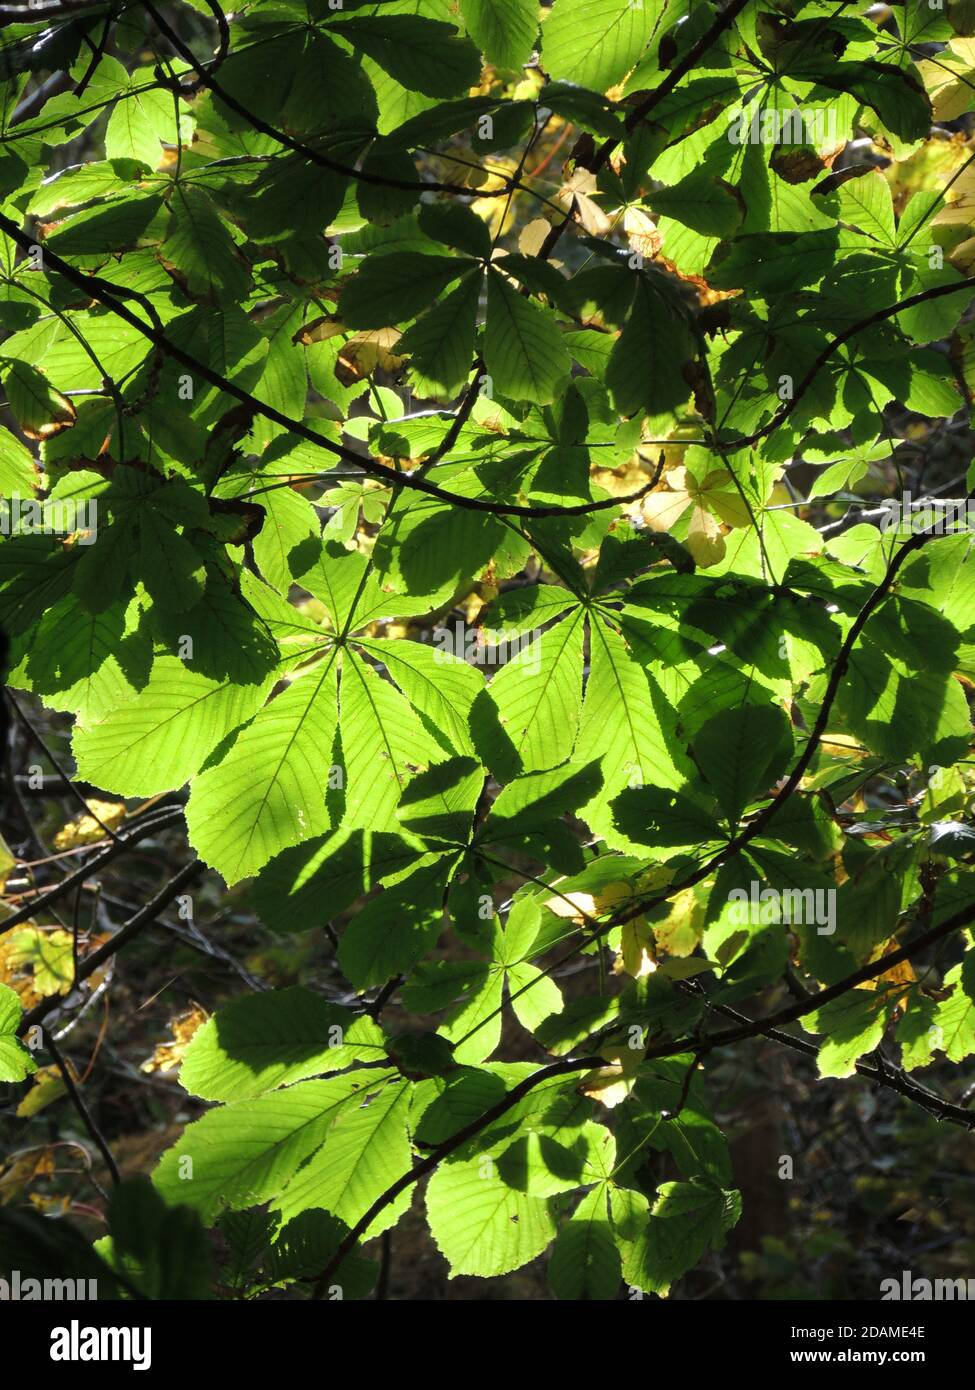 The sunlit leaves of a Horse Chestnut tree (Aesculus hippocastanum). Stock Photo